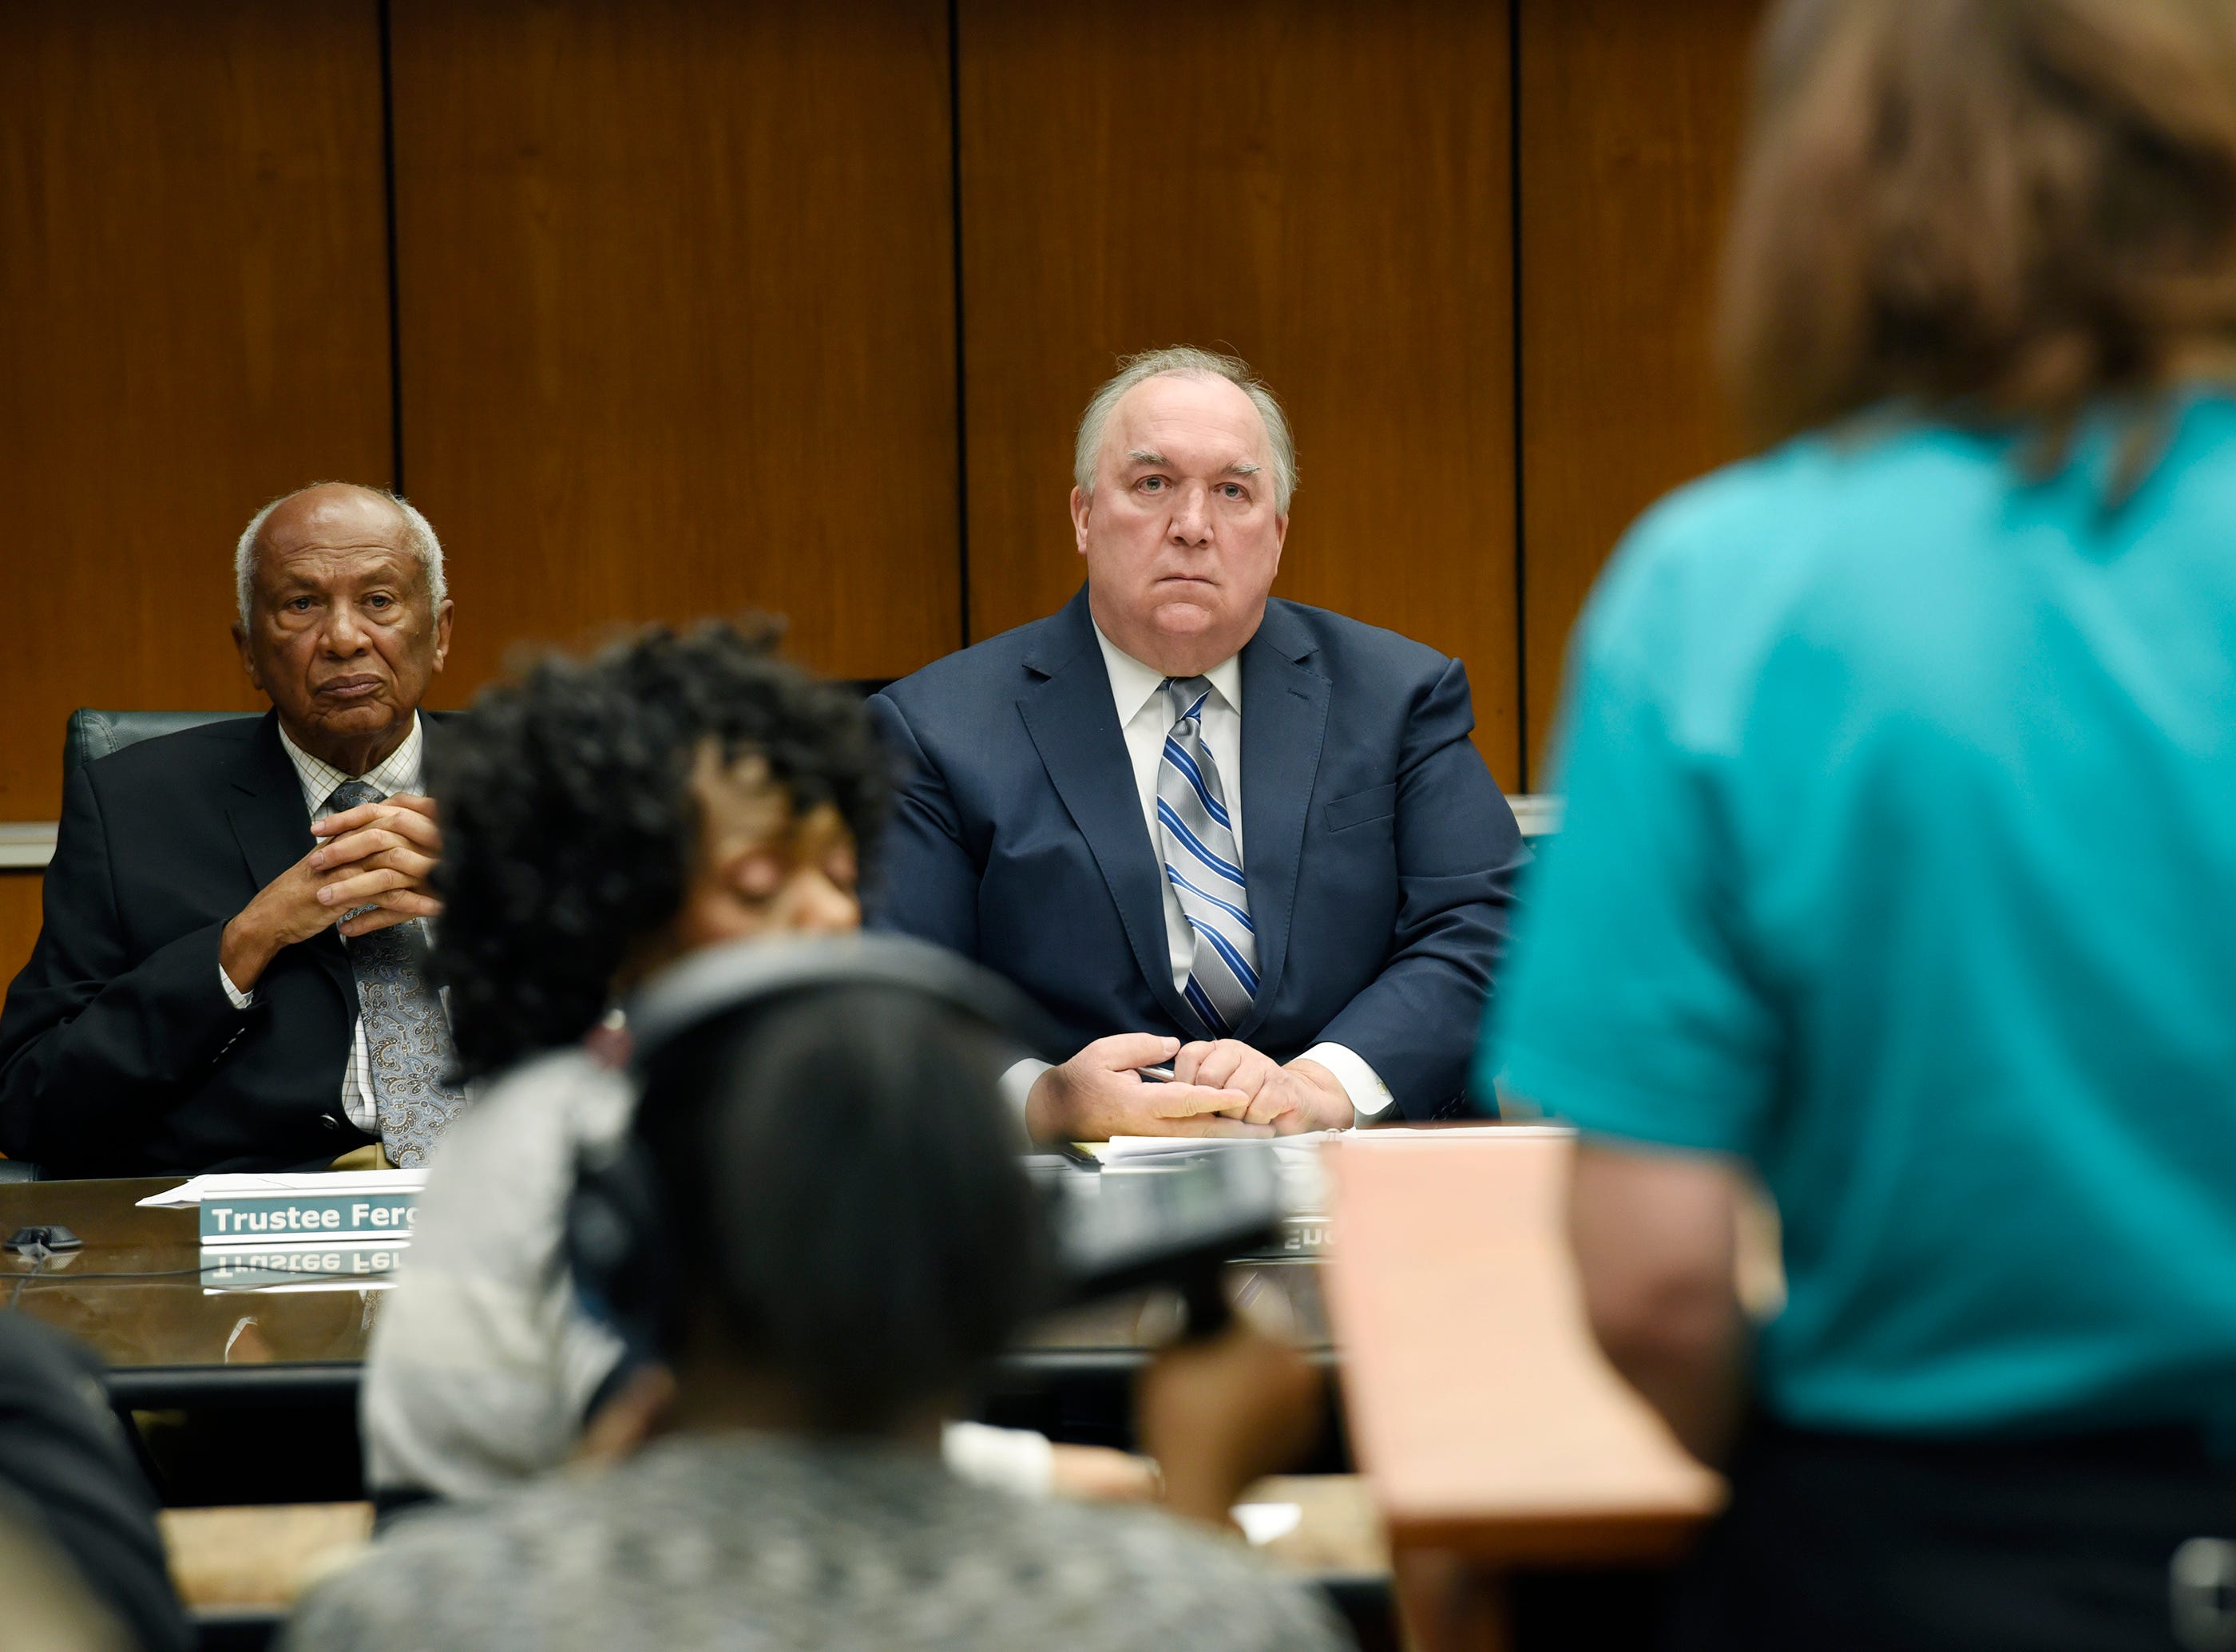 Interim President John Engler and trustee Joel Ferguson listen to a student during the public comment portion of Michigan State University's Board of Trustees meeting on Wed., Jan. 9, 2018 in East Lansing.